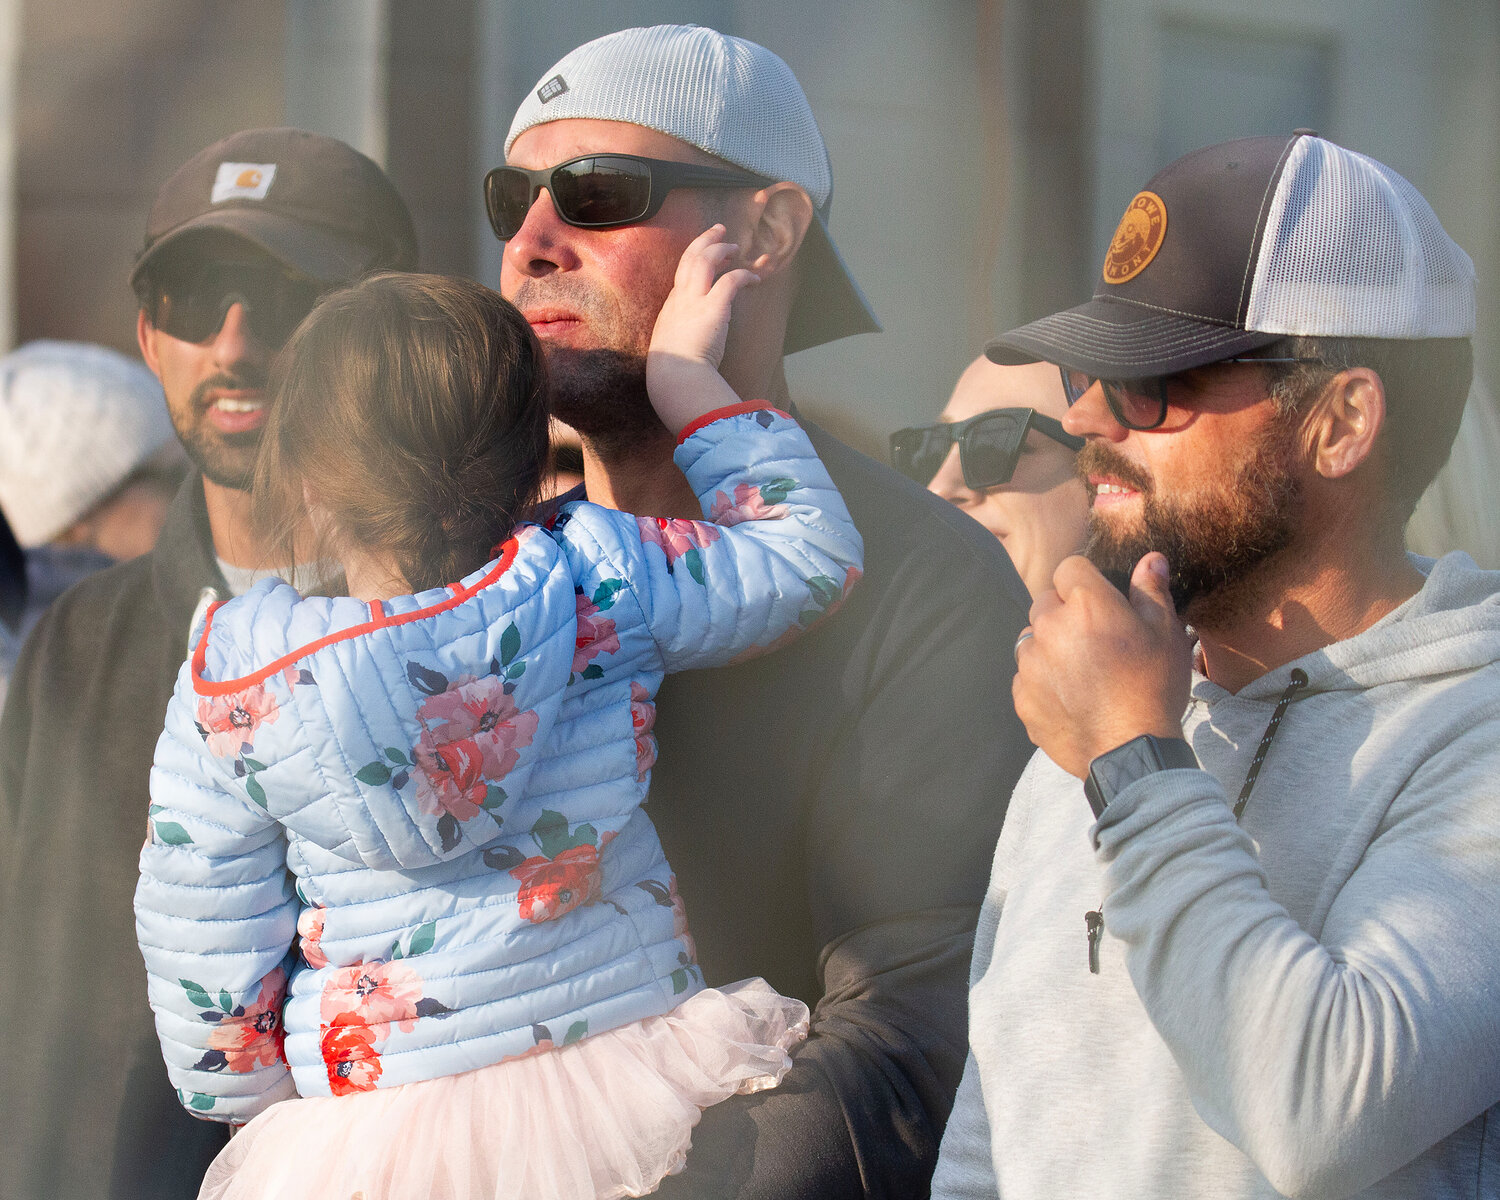 Paul Medeiros holding his daughter, looks on during the game.